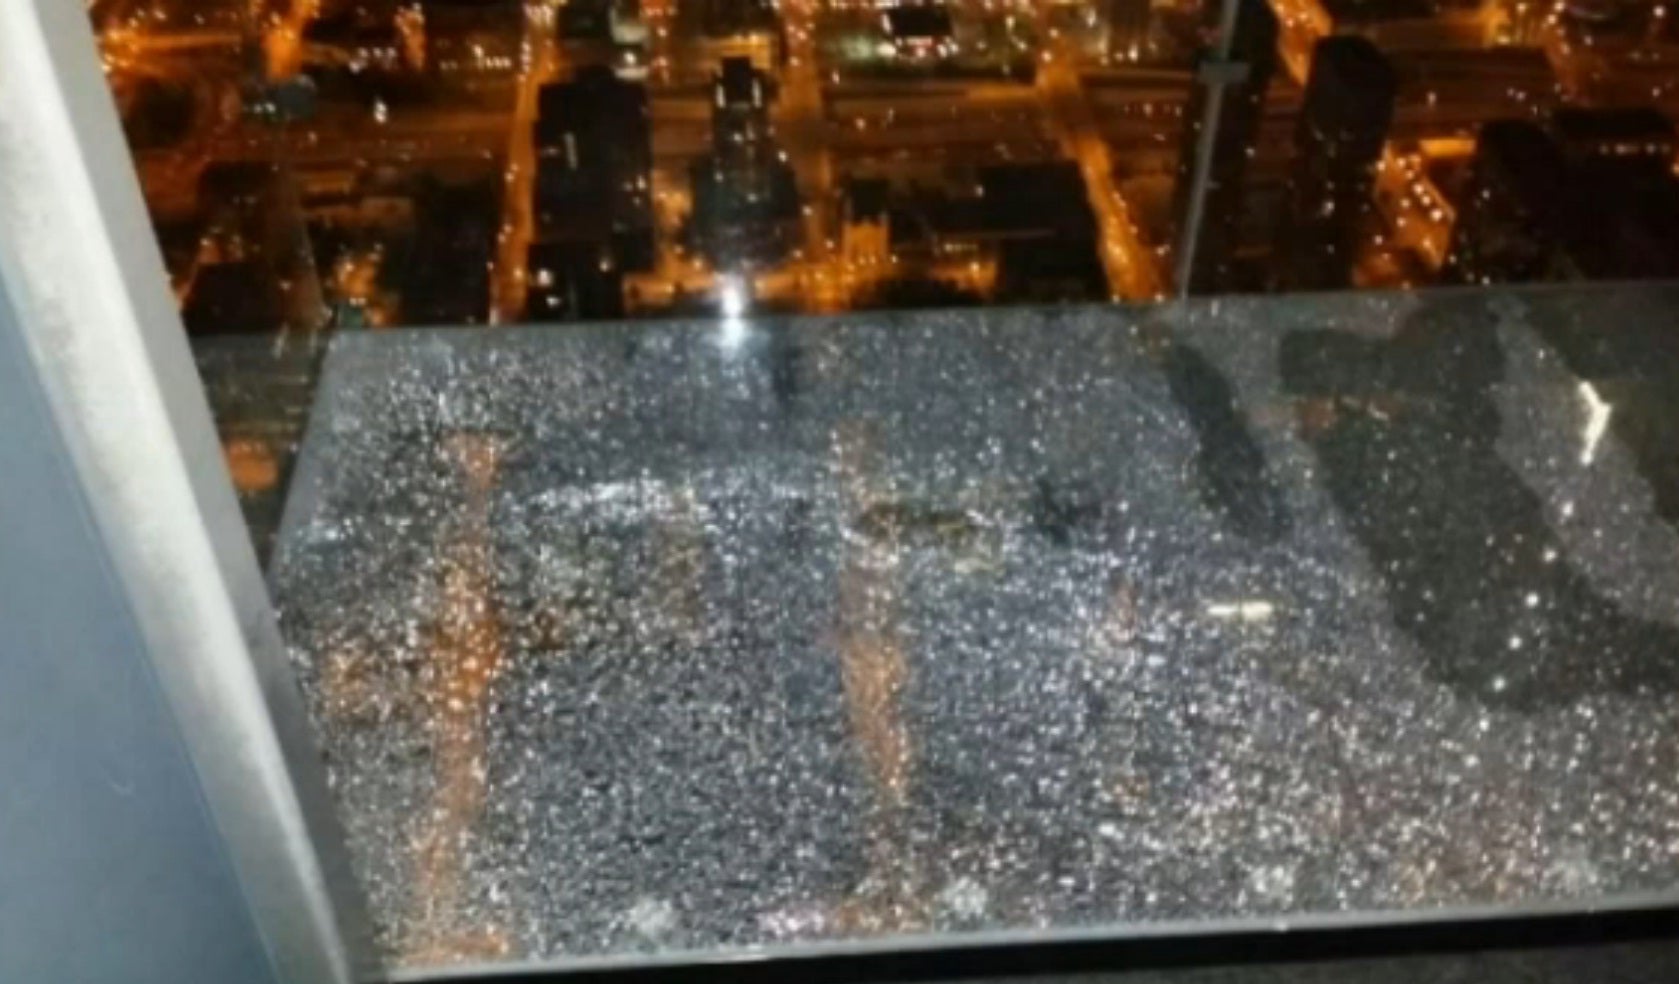 A visitor to the tower took a photo of the glass beneath them